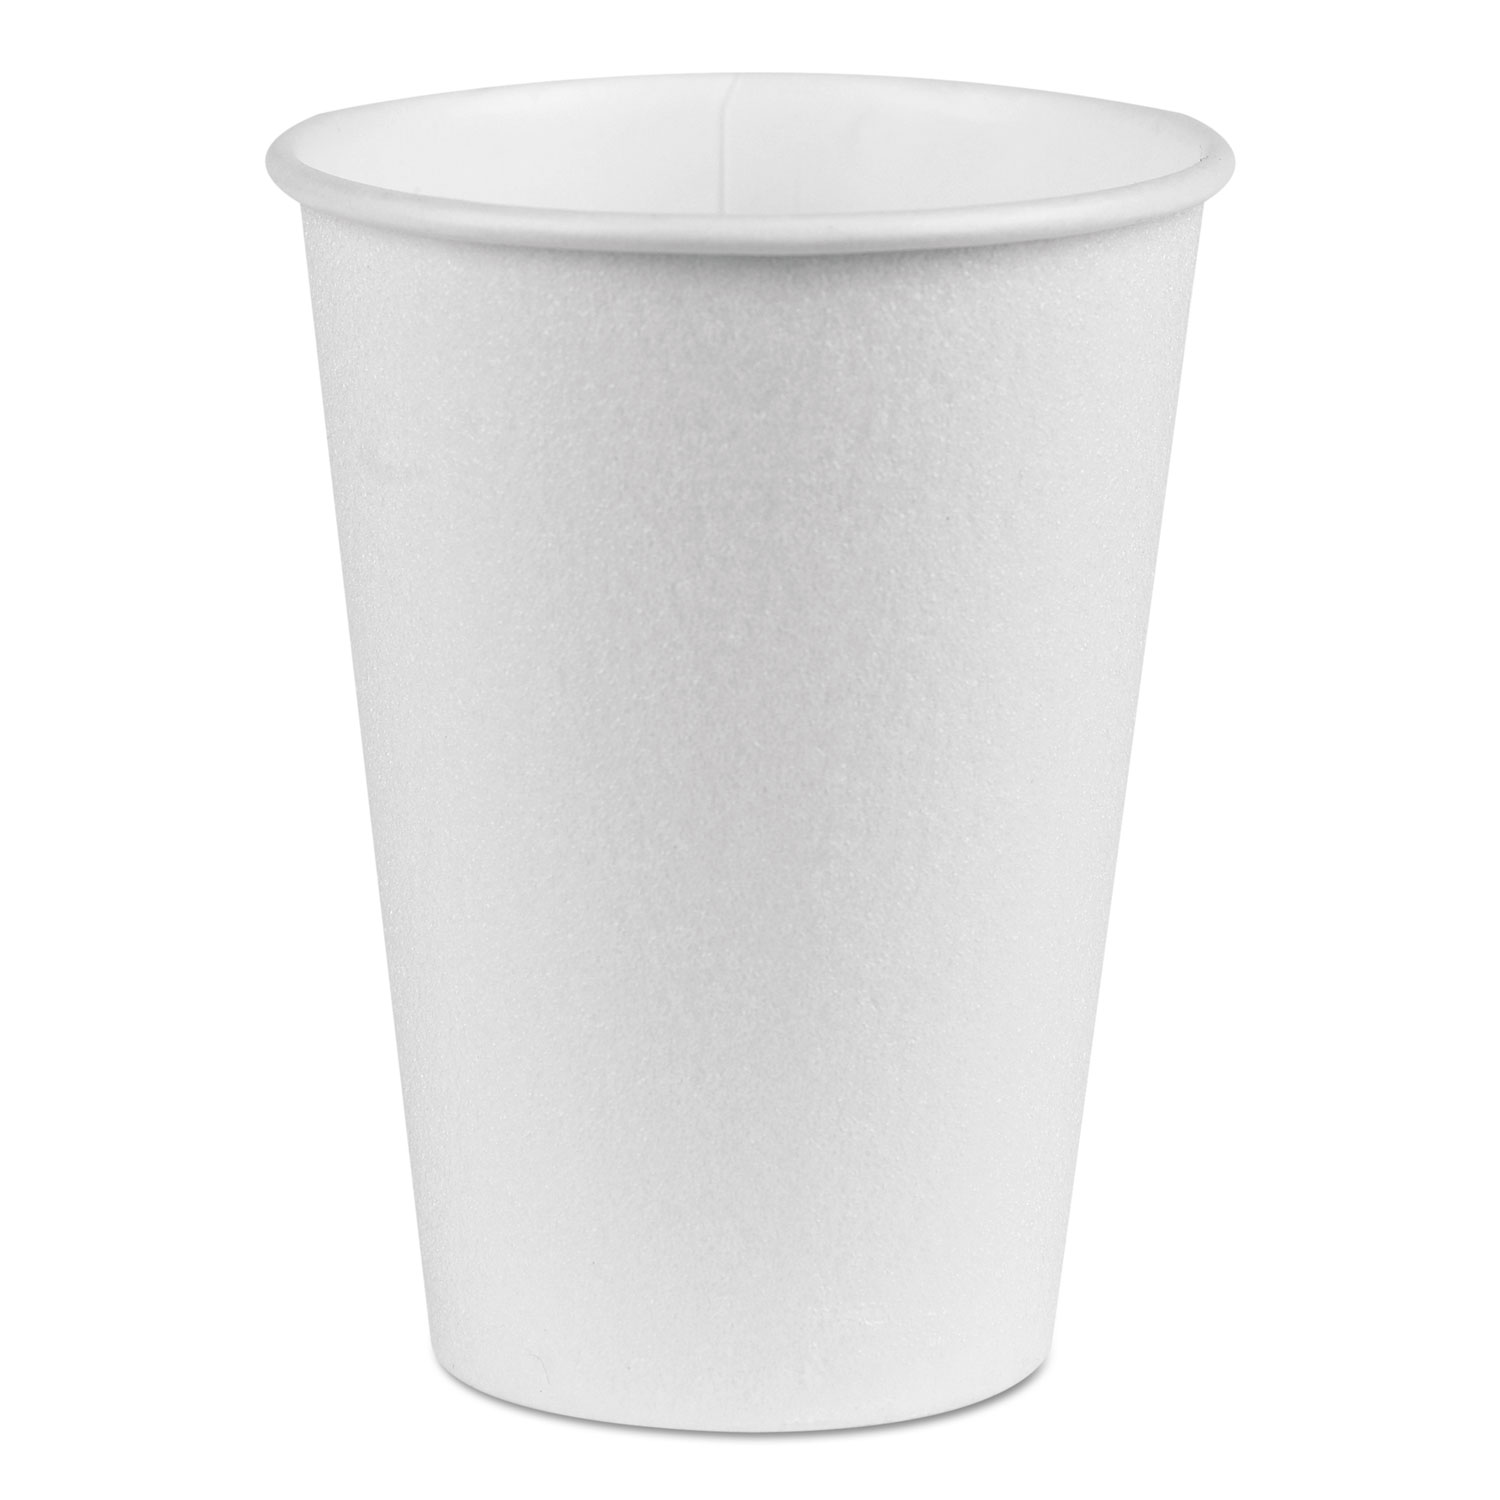  Dixie 5342W PerfecTouch Hot/Cold Cups, 12 oz., White, 50/Bag, 20 Bags/Carton (DXE5342W) 